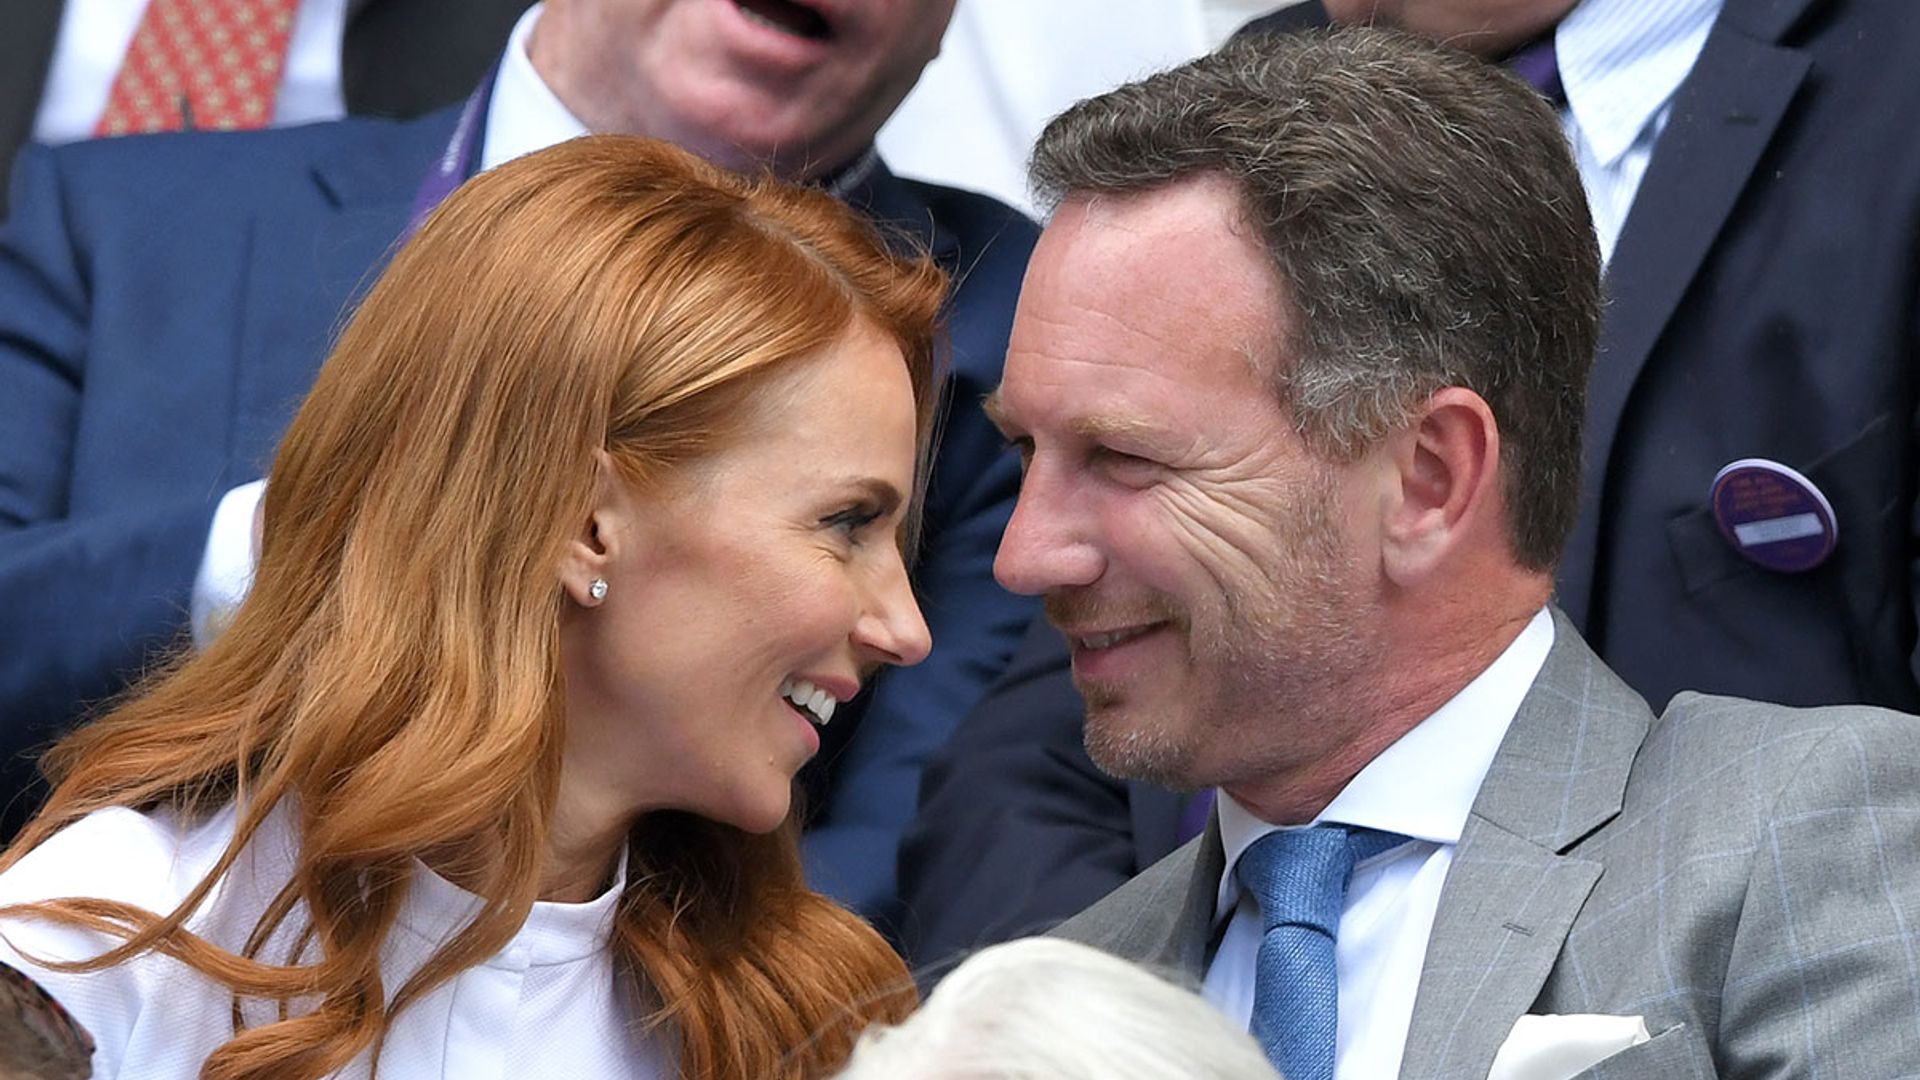 Geri Horner shares gorgeous photo from wisteria-filled garden to mark 5th wedding anniversary